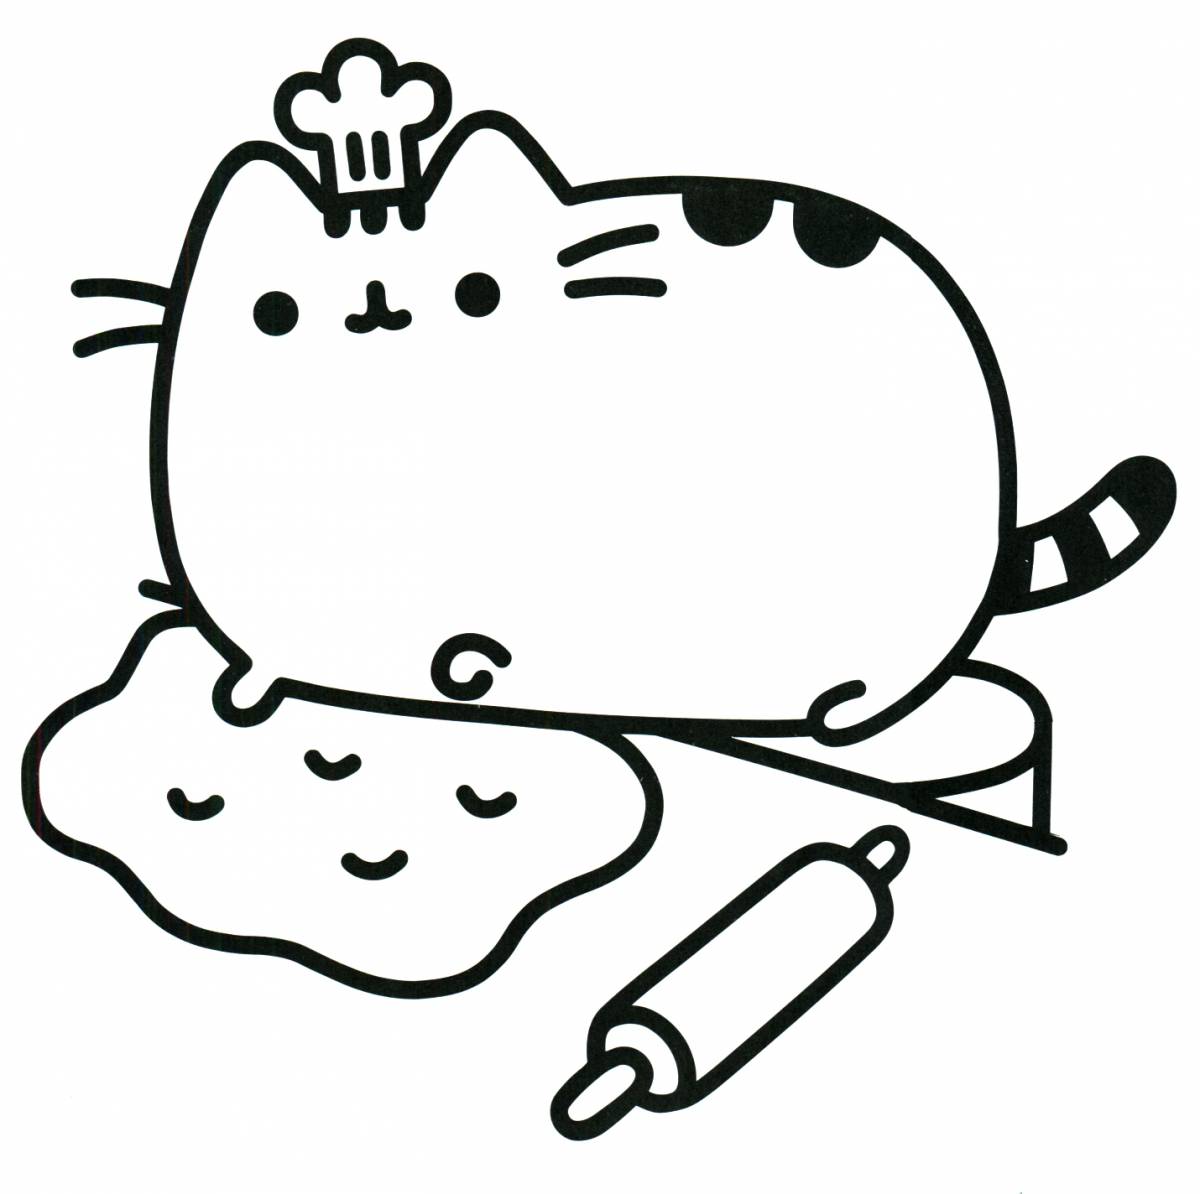 Radiant pusheen coloring page